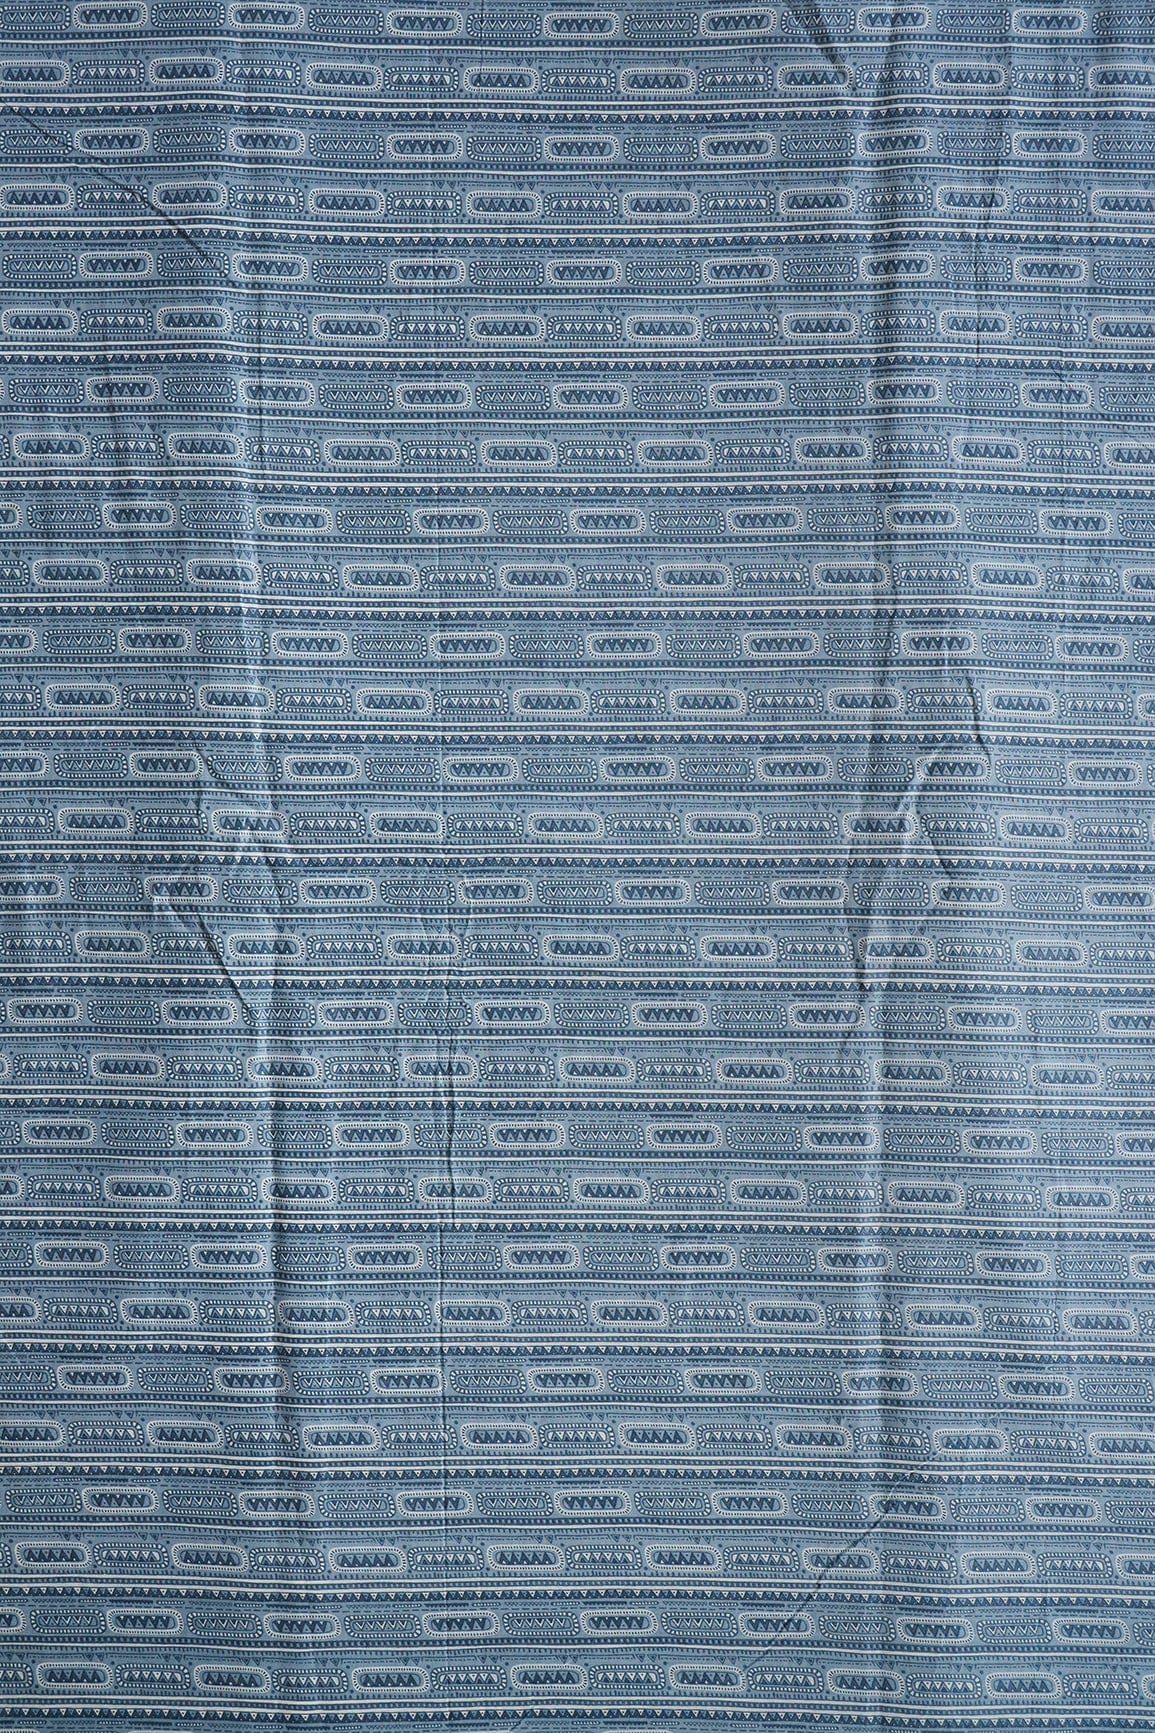 doeraa Prints Grey And White Geometric Foil Print On Pure Mul Cotton Fabric